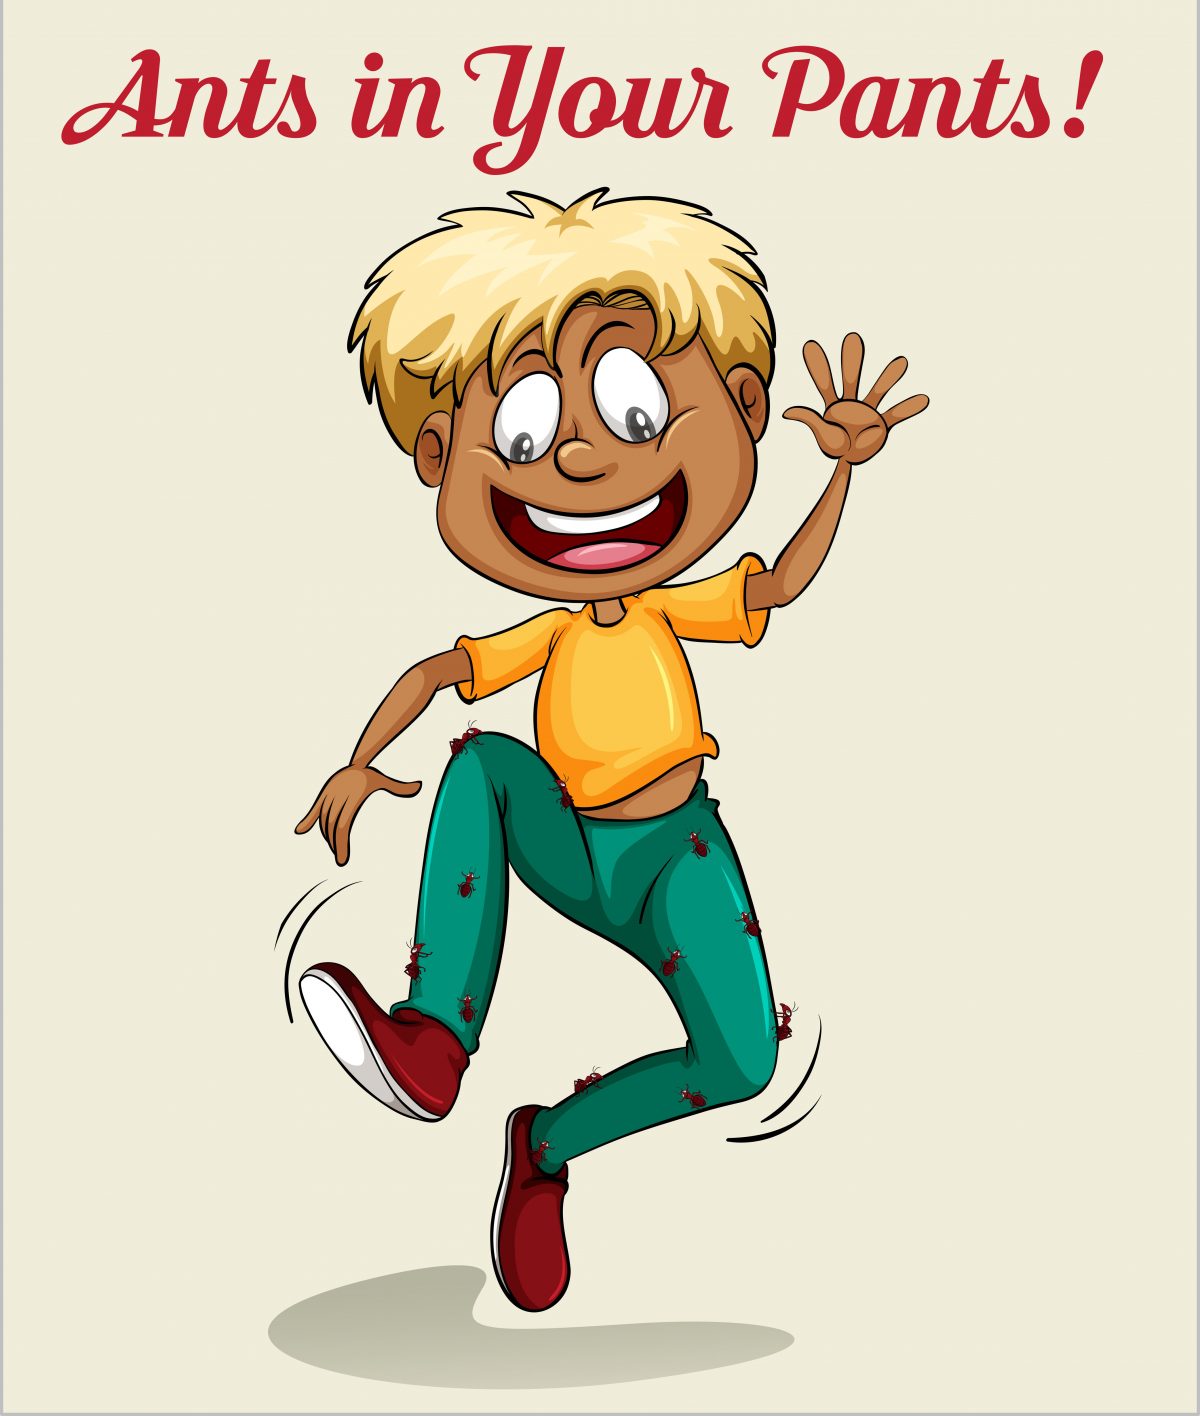 Ants in your pants